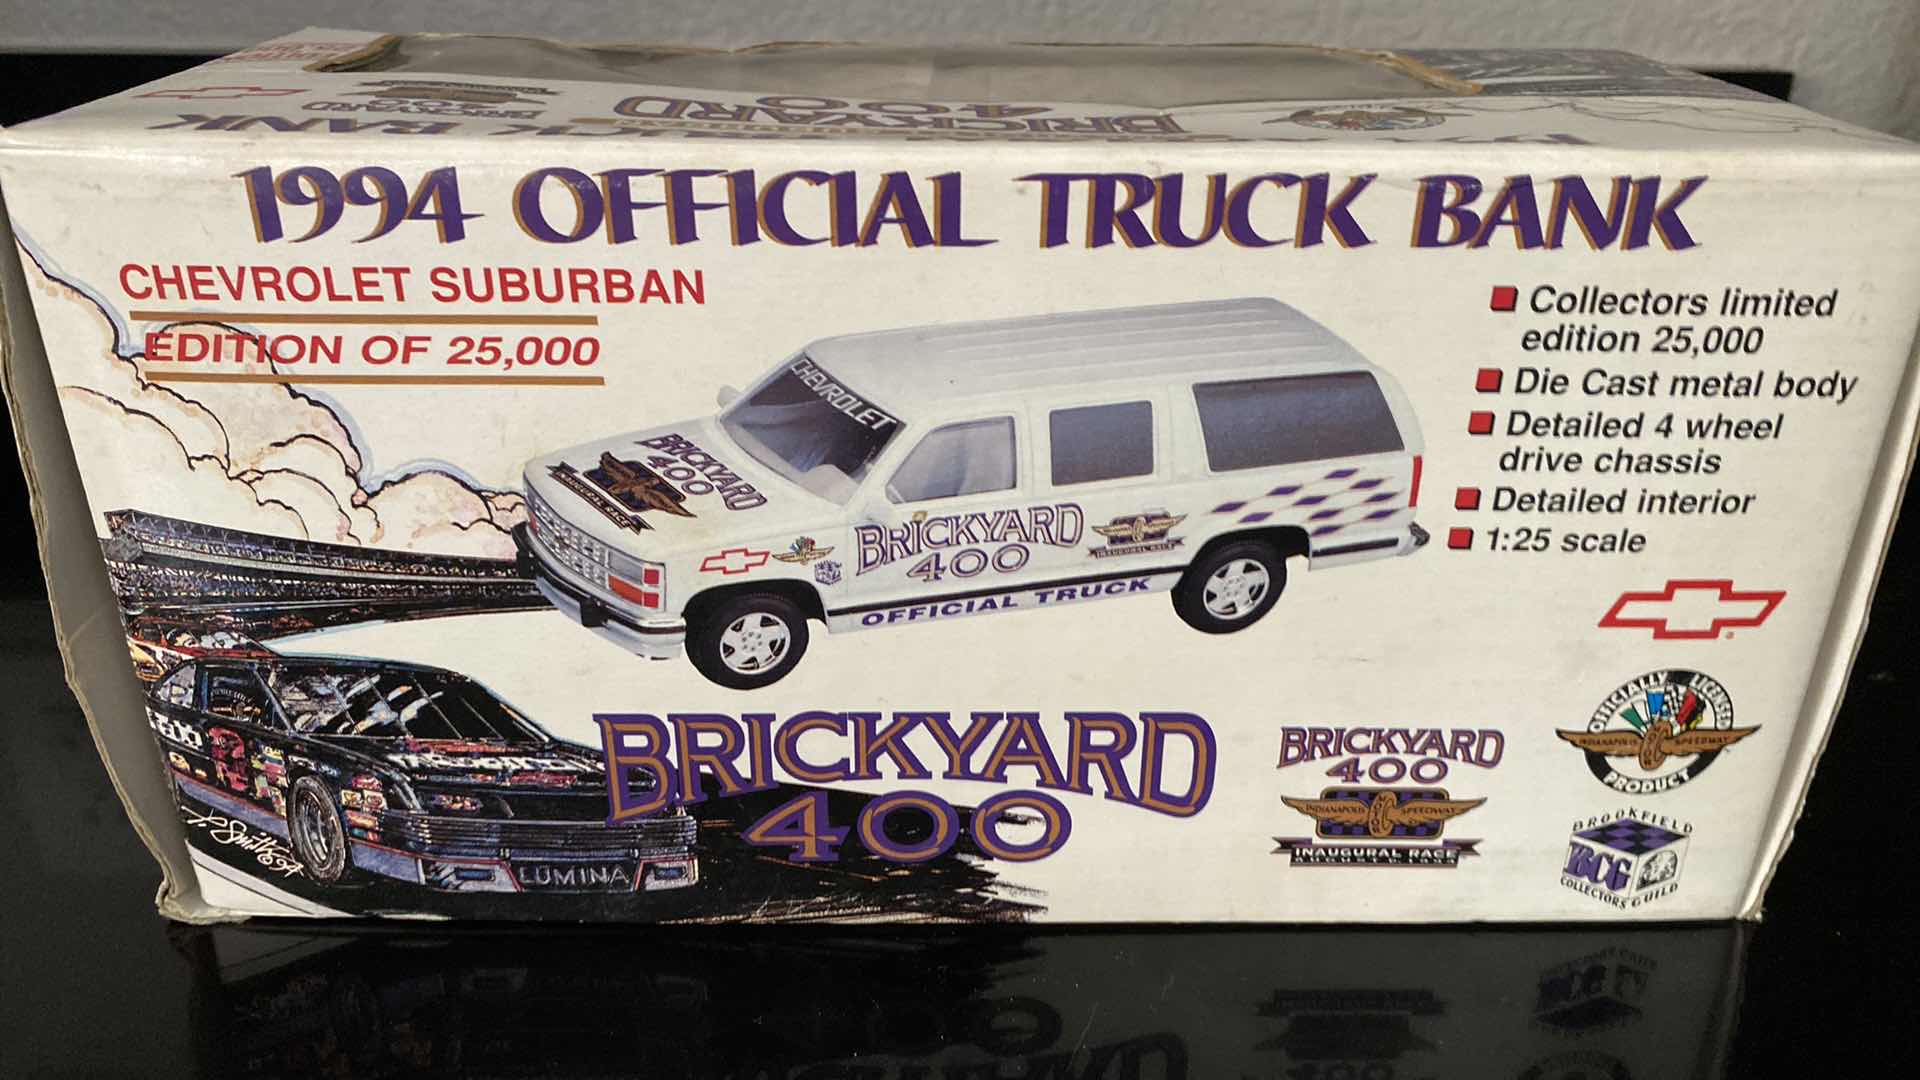 Photo 3 of VINTAGE 1994 BRICKYARD 400 LIMITED EDITION INAUGURAL RACE OFFICIAL TRUCK BANK CHEVROLET SUBURBAN